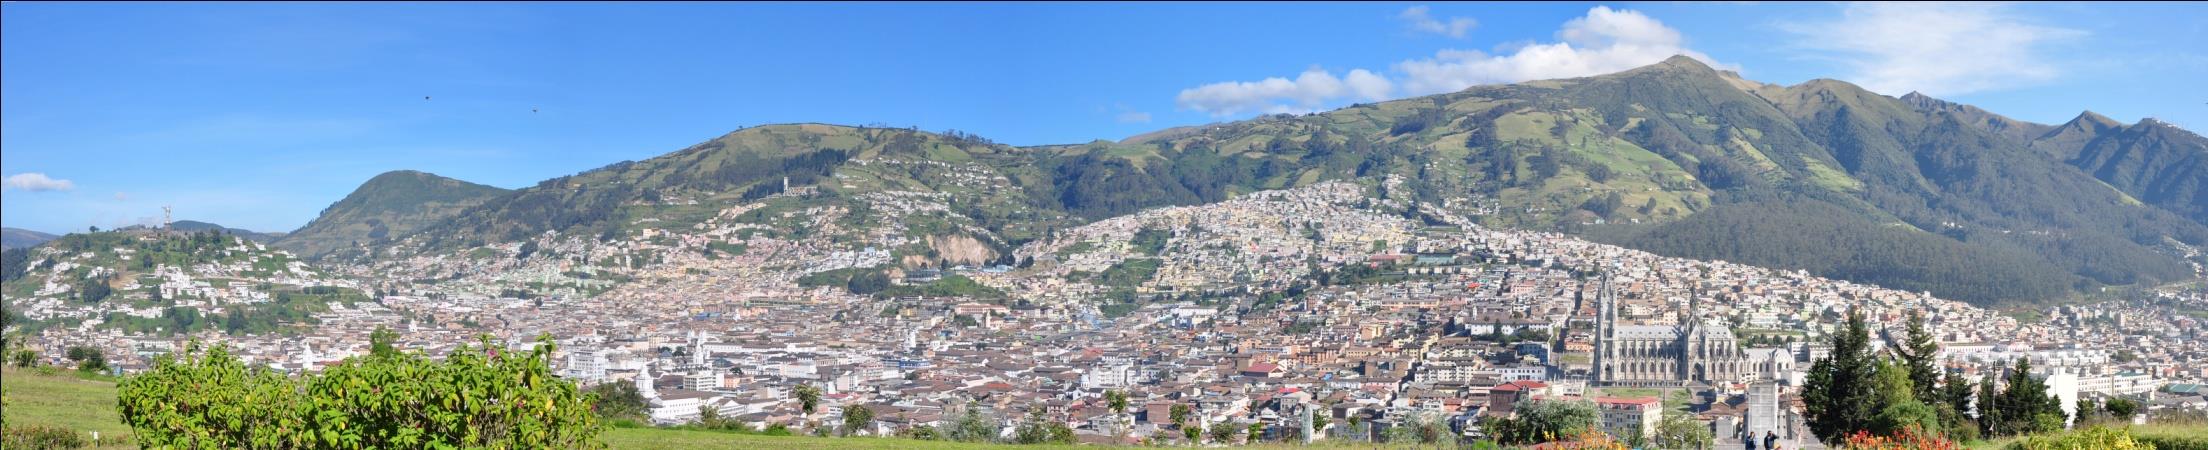 Quito Guayaquil 272,046 (with Galapagos) km2 2010